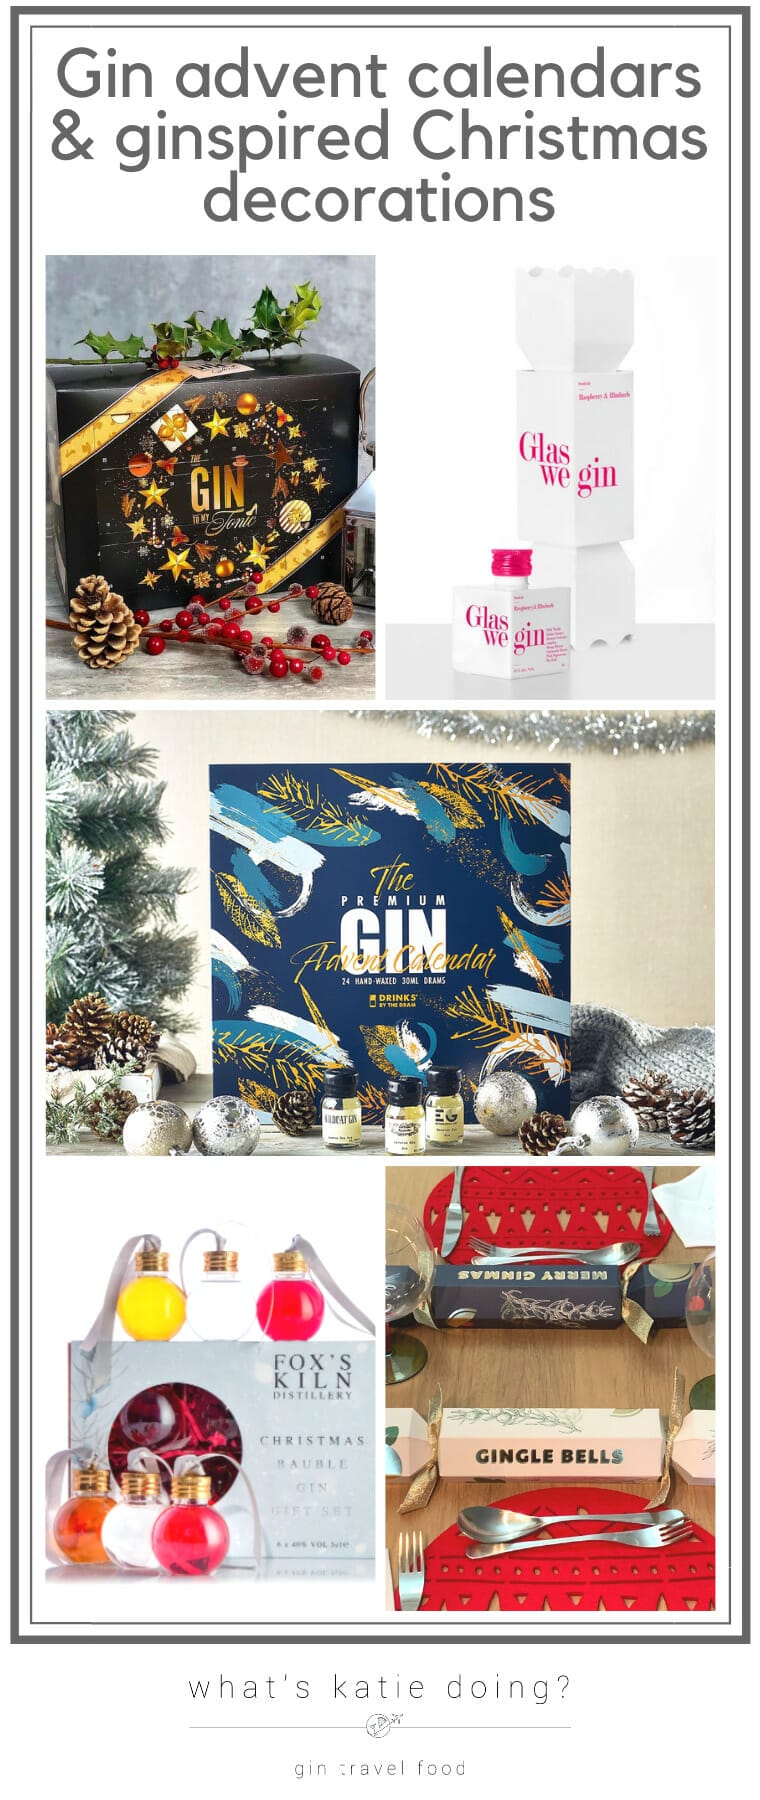 Gin advent calendars and gin-inspired Christmas decorations